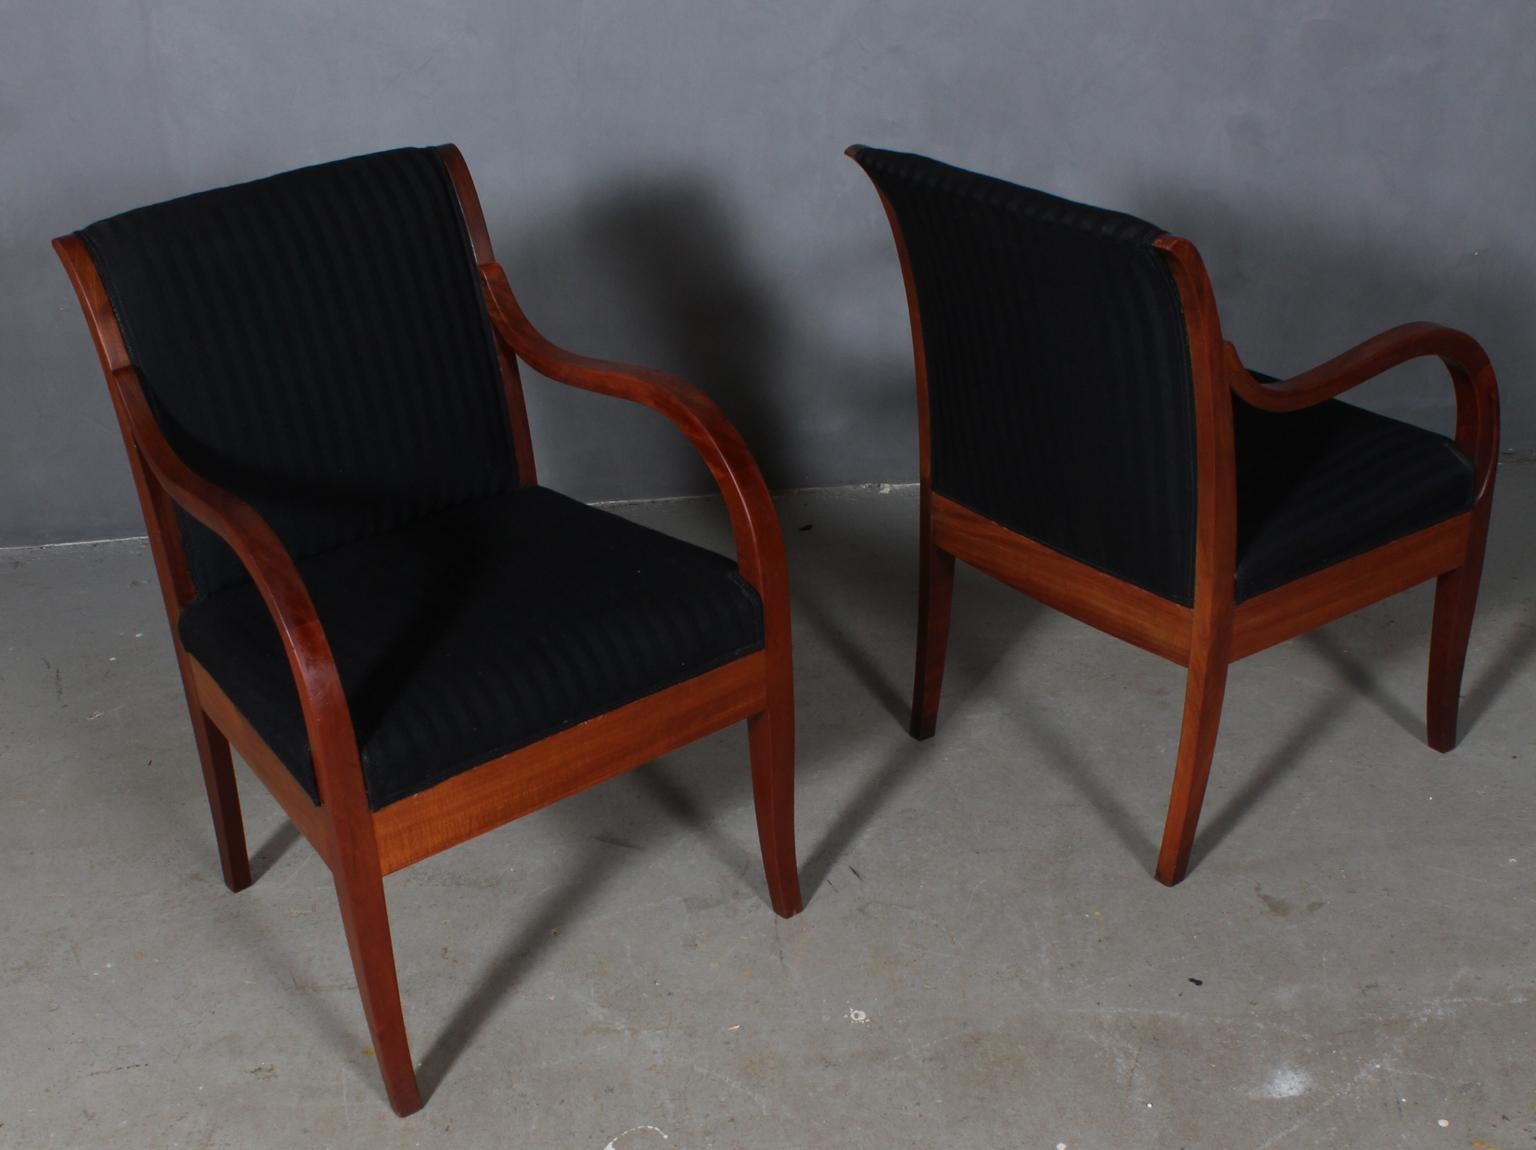 Rud Rasmussen pair of lounge chairs with frame of mahogany.

Upholstered with striped fabric. 

Made by Rud Rasmussen.